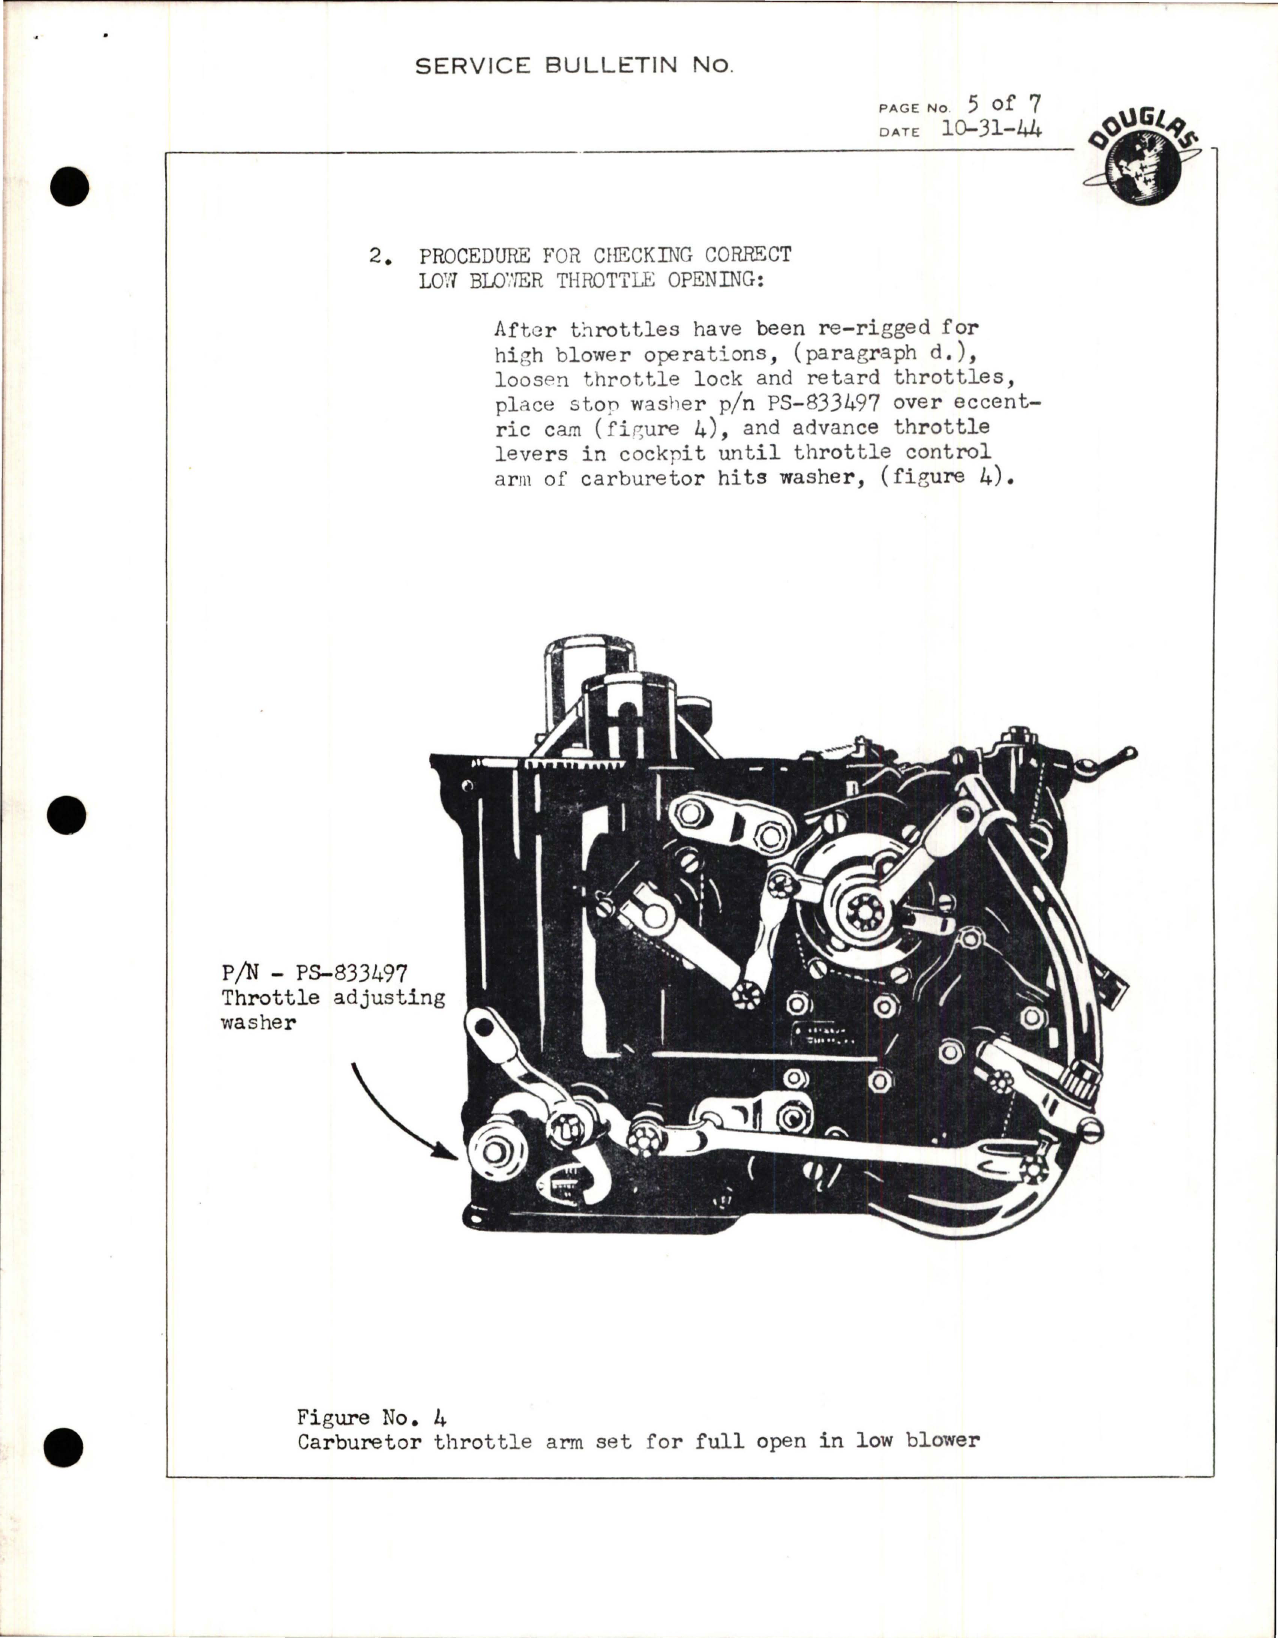 Sample page 5 from AirCorps Library document: Installation of Plate Assembly Throttle Shops - Part 5115229